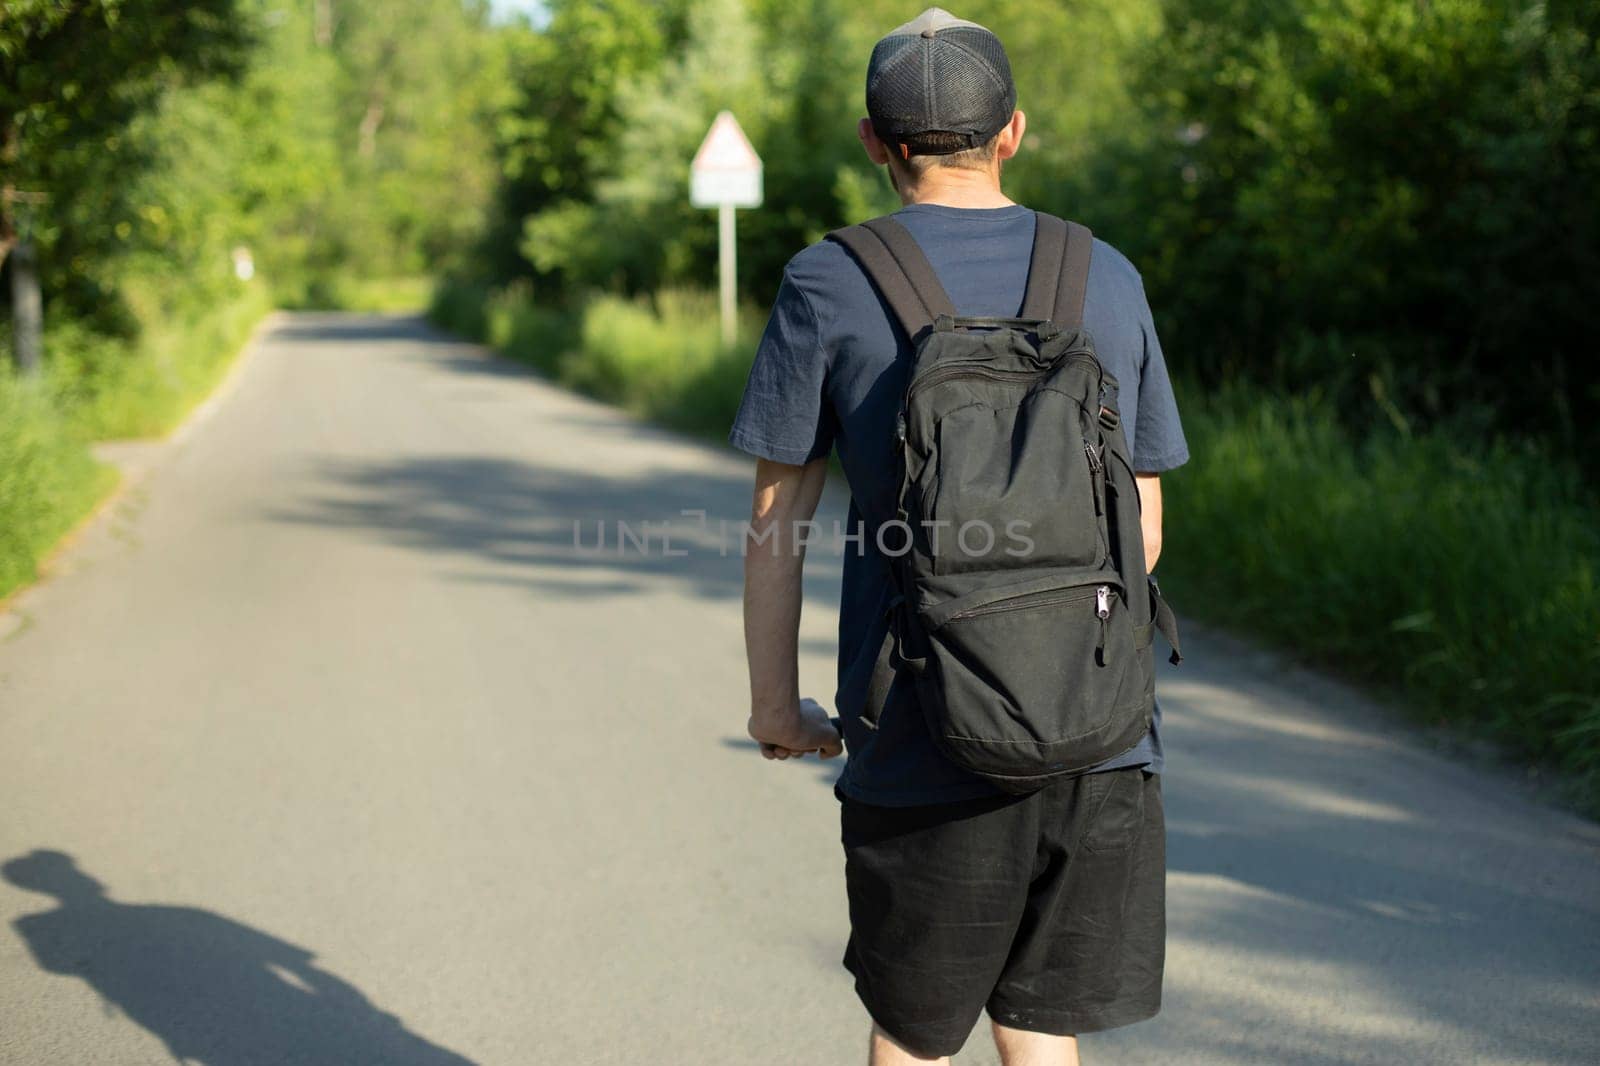 Guy rides scooter down road. Traveling with backpack. Black backpack on back. Traveler on empty road in summer.